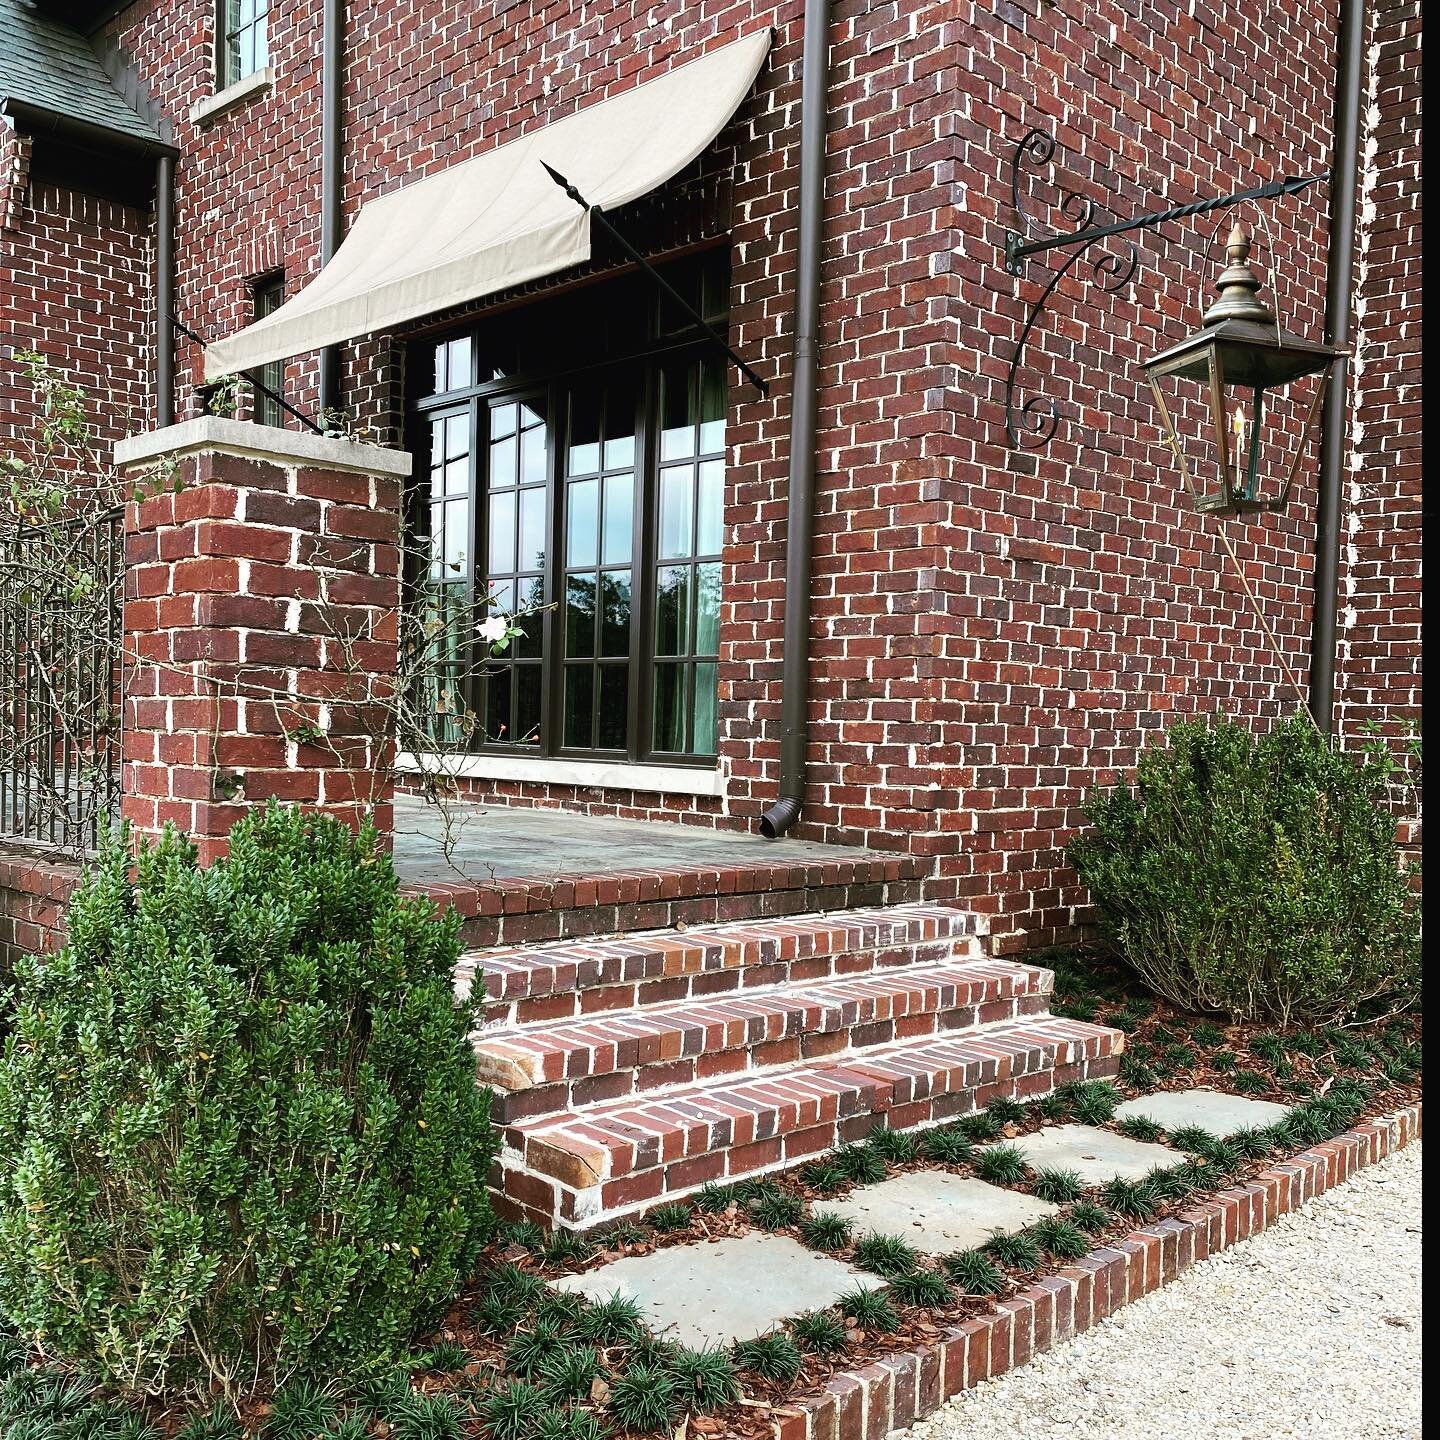 Who says your side entrance can&rsquo;t take the center stage? 

#hardscapedesign 
#brickandmortar 
#landscape
#landscapedesign 
#courtyardentrance 
#elegantdesign 
#copperlantern